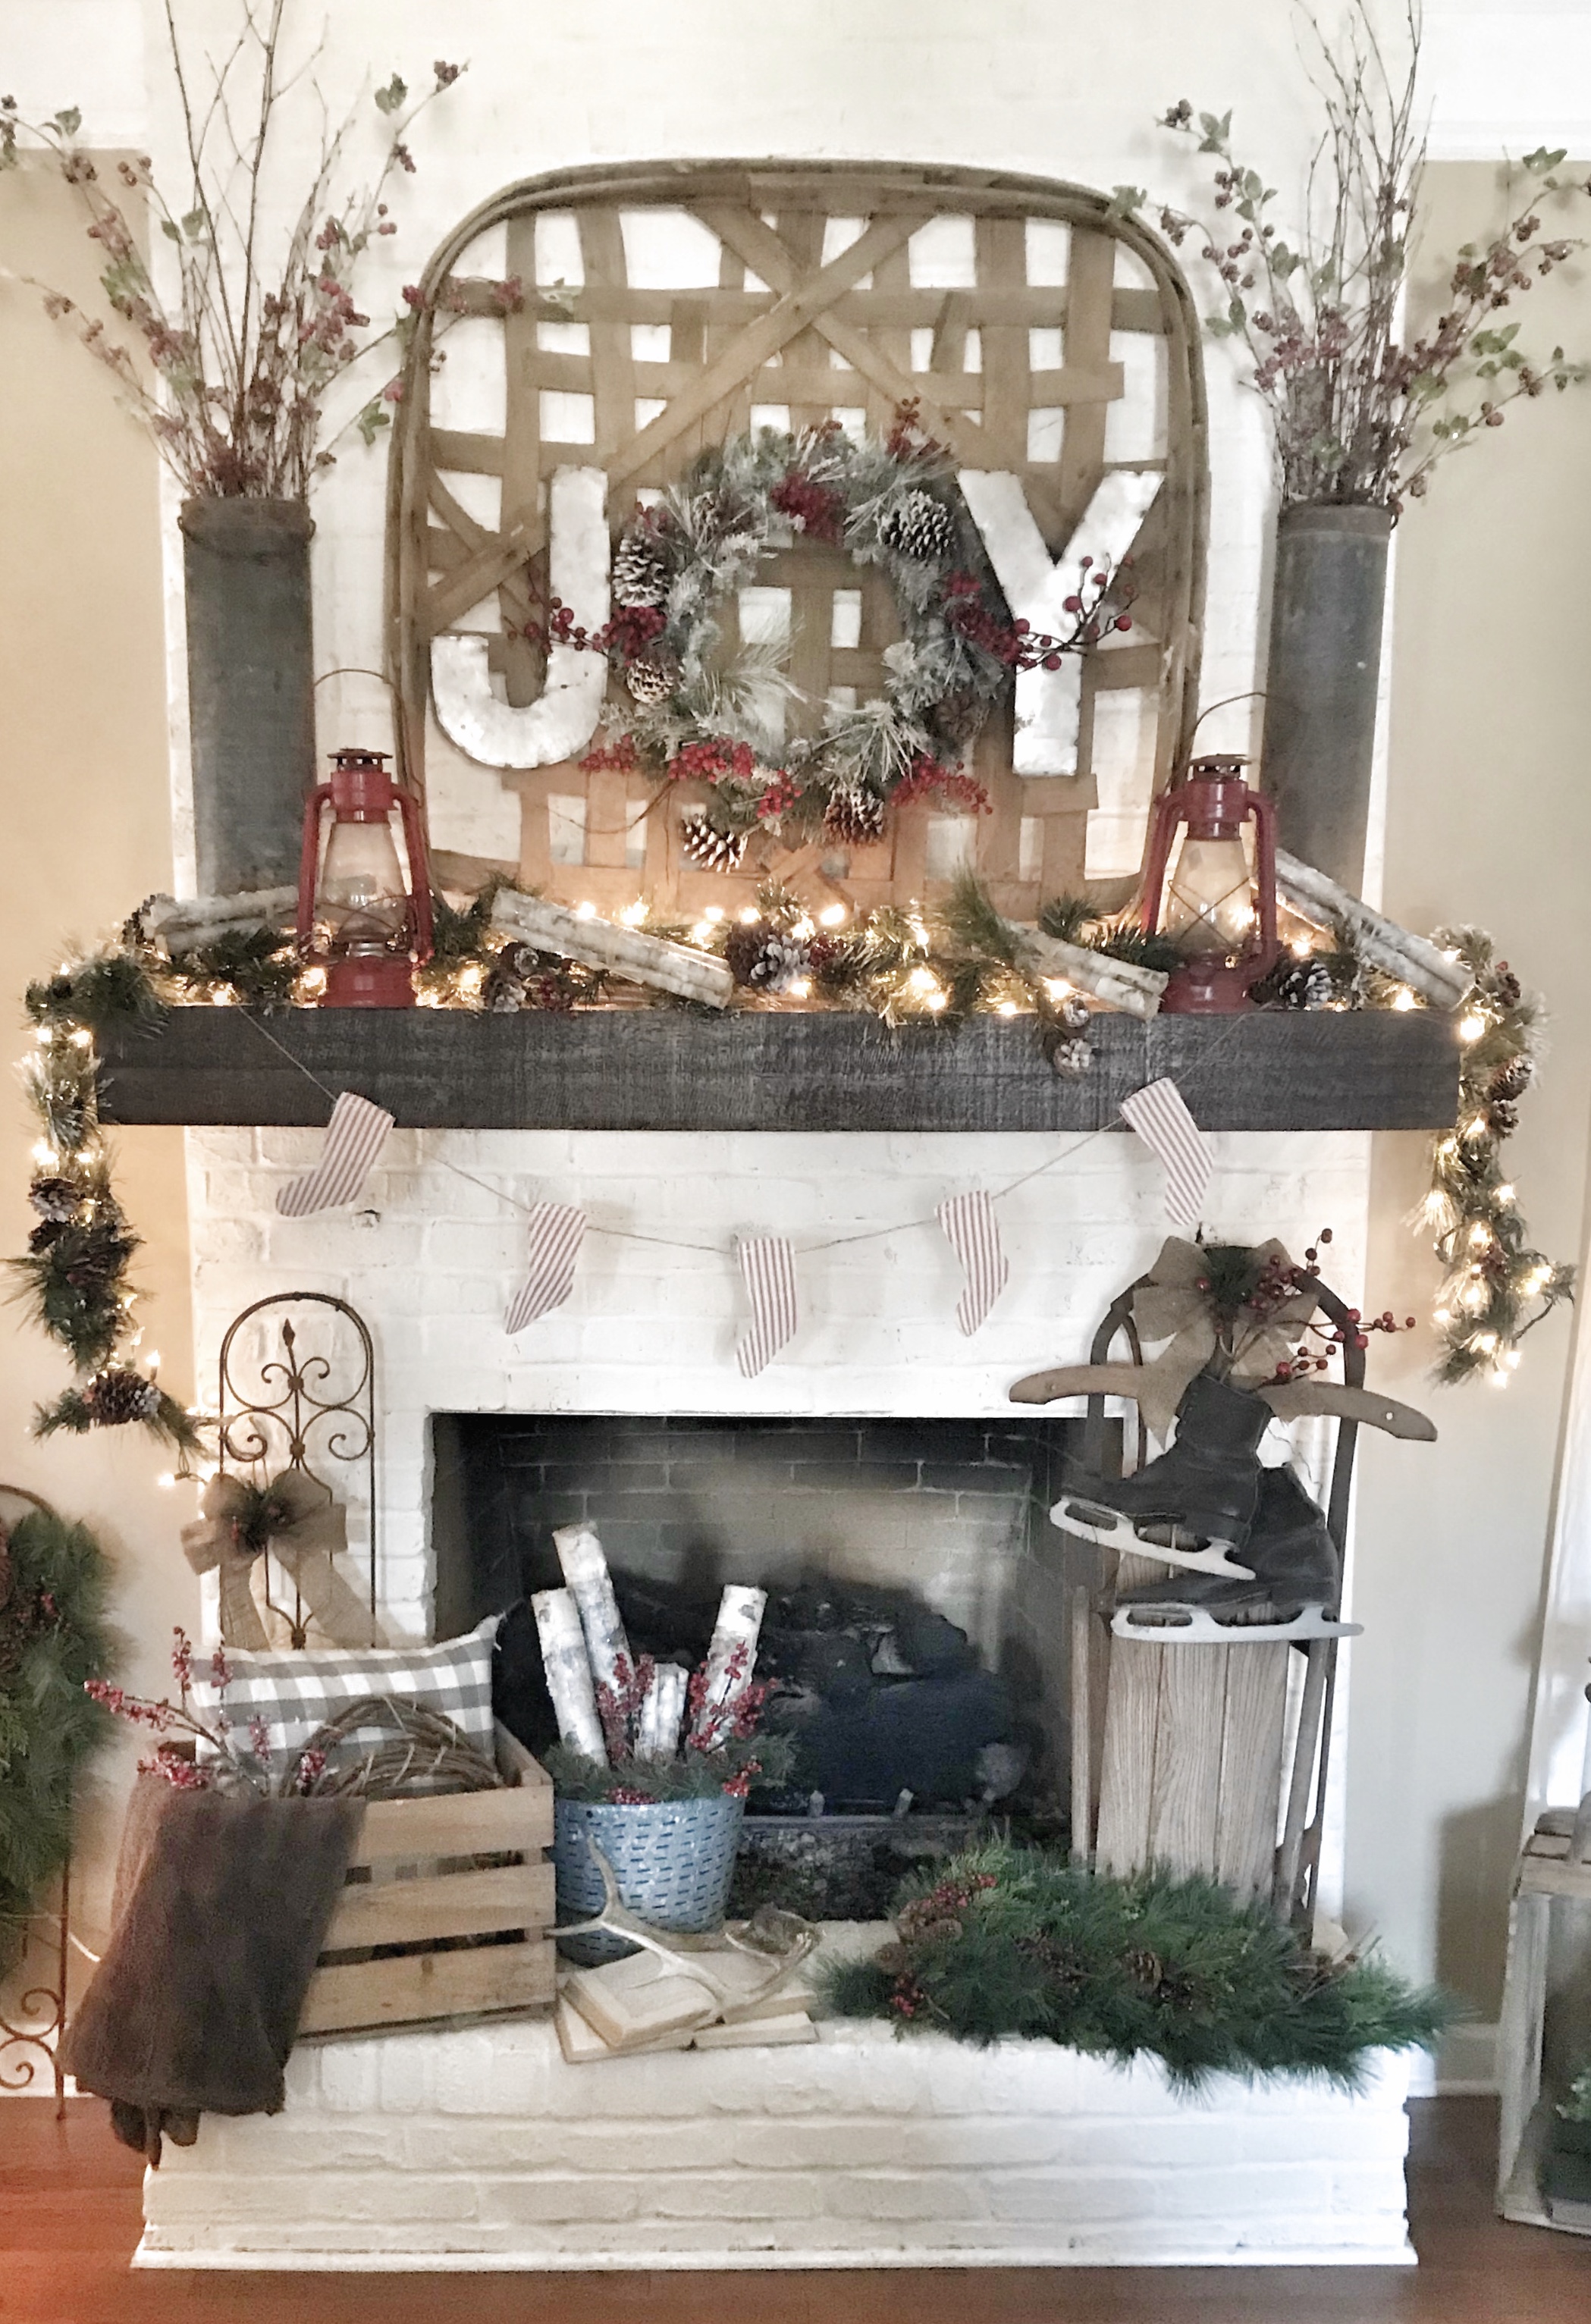 mantel decorated for Christmas with garland, lights, and joy sign